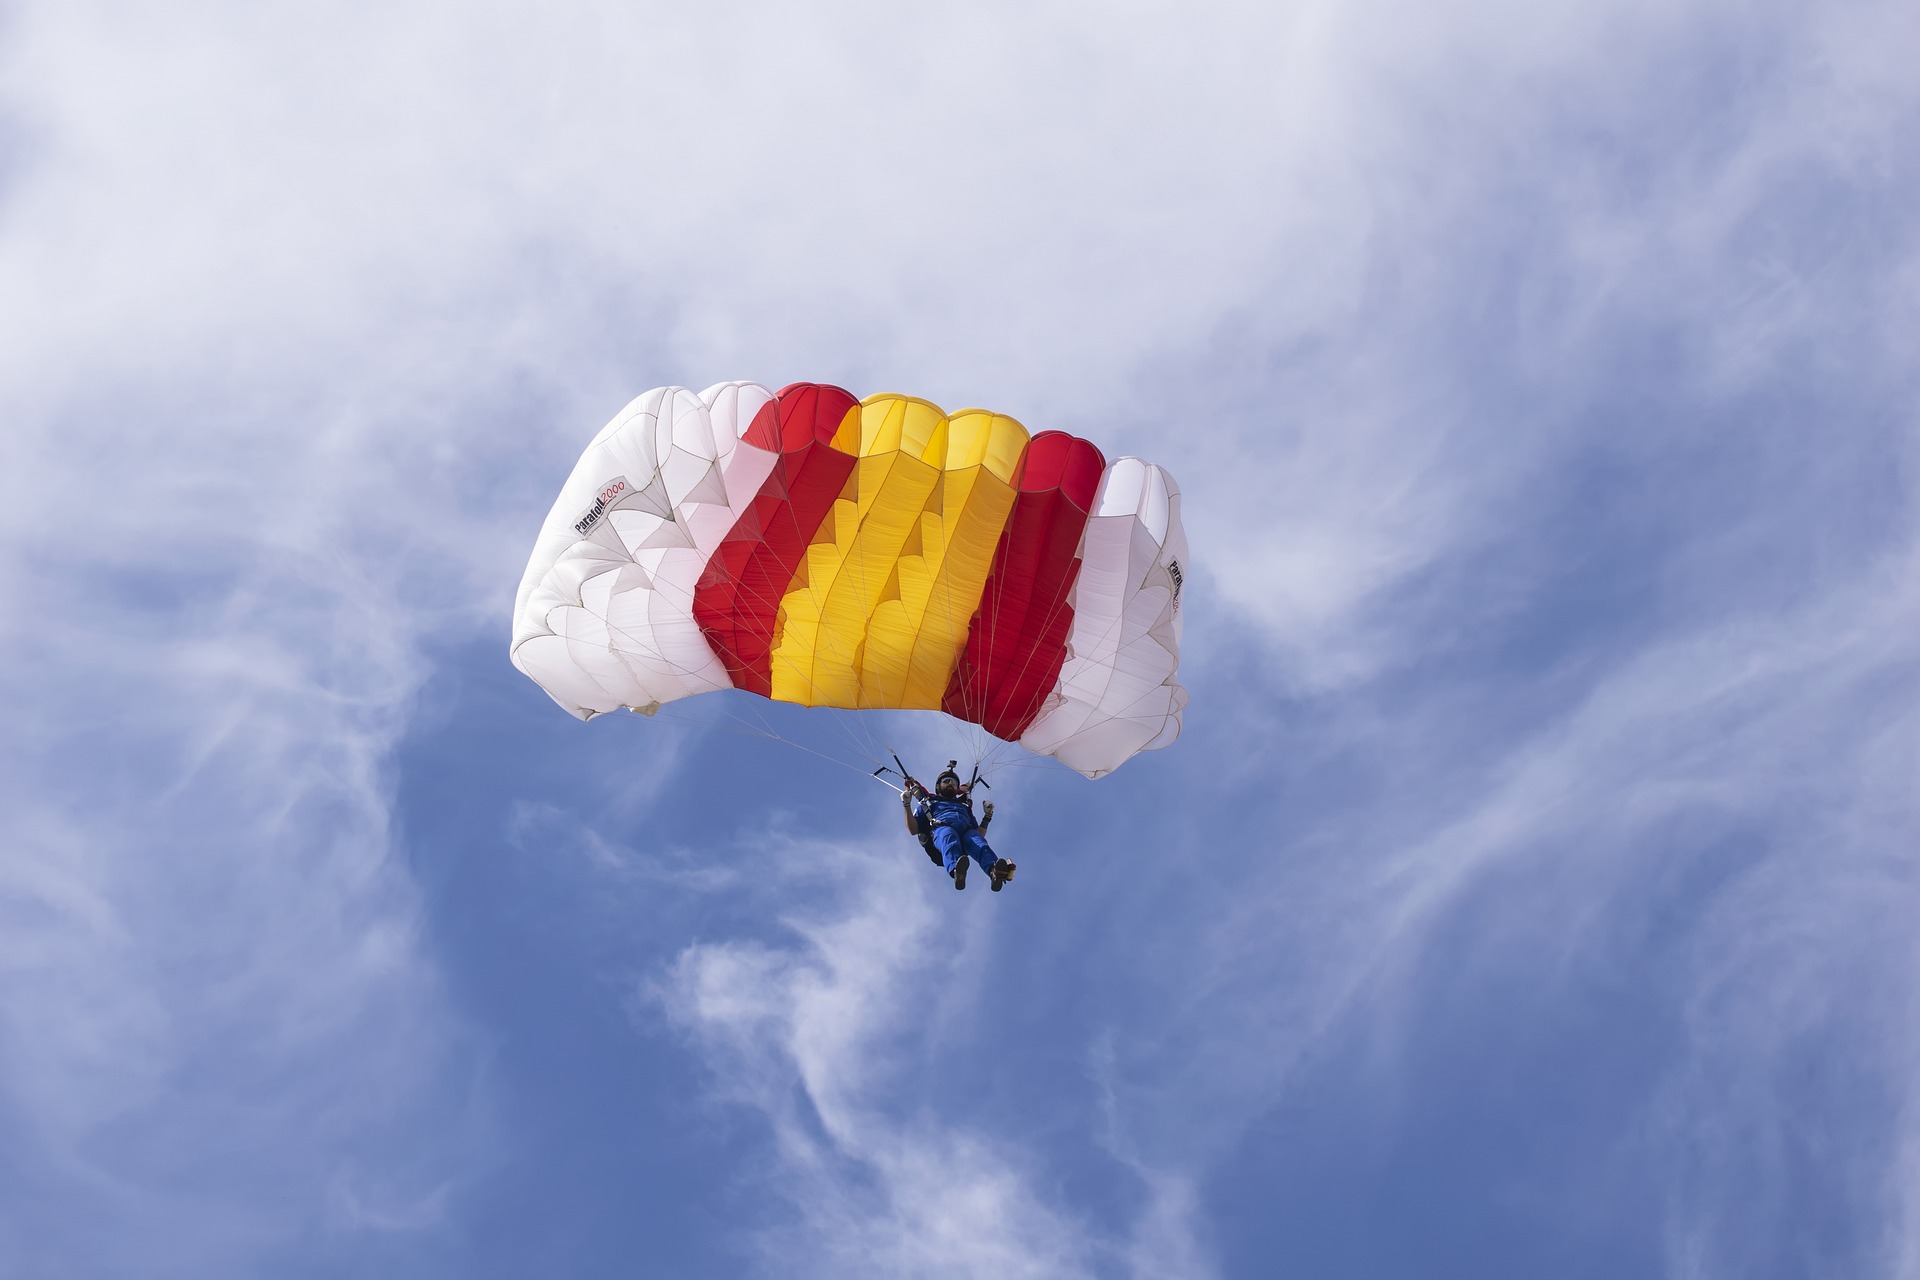 A skydiver with parachute